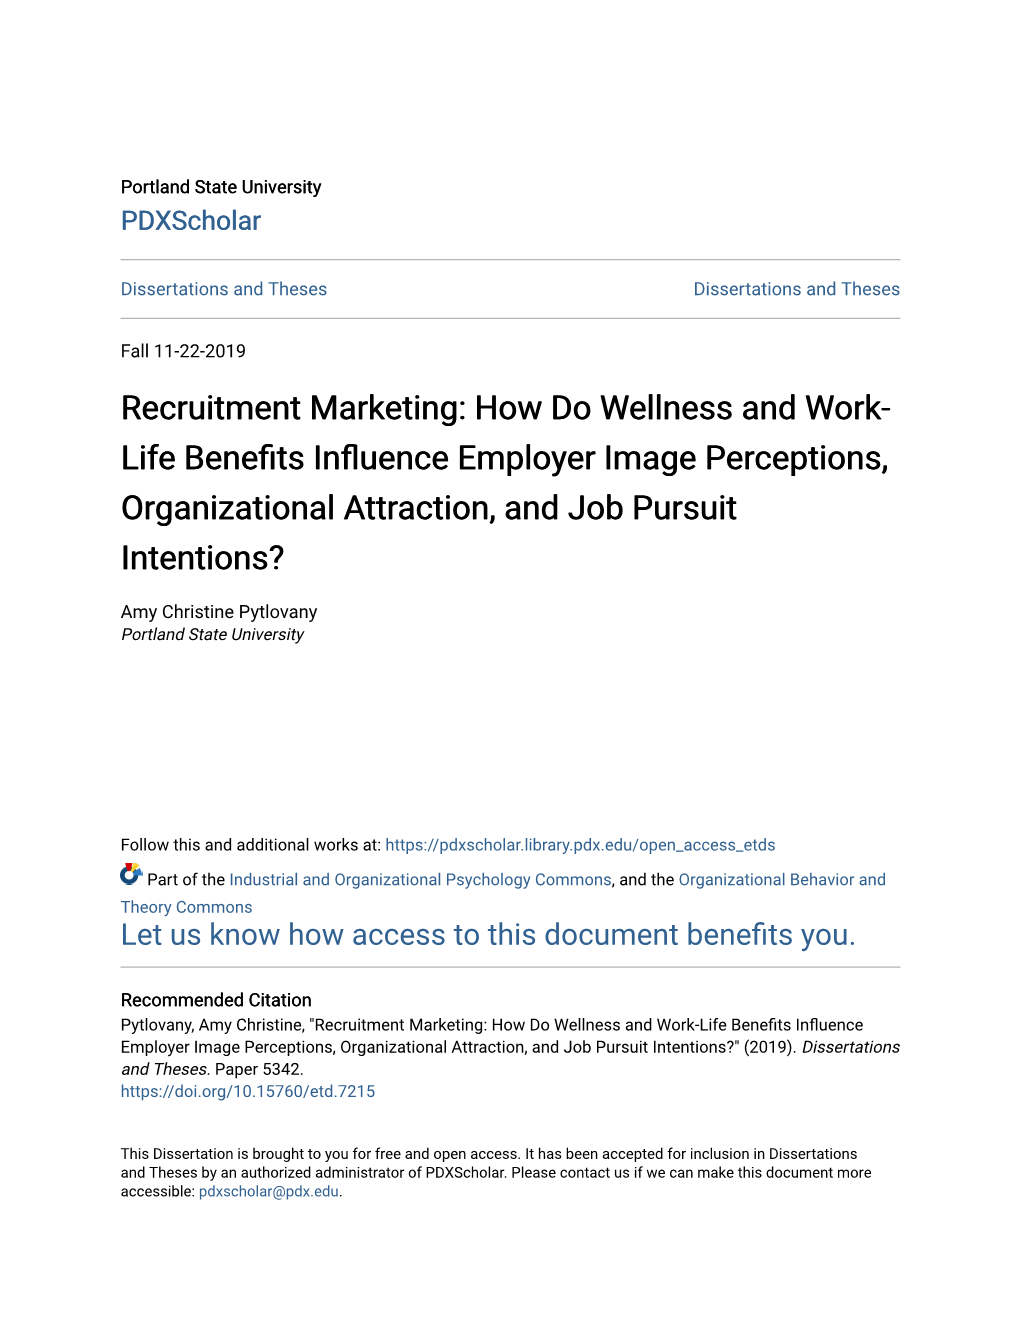 How Do Wellness and Work-Life Benefits Influence Employer Image Perceptions, Organizational Attraction, and Job Pursuit Intentions?" (2019)